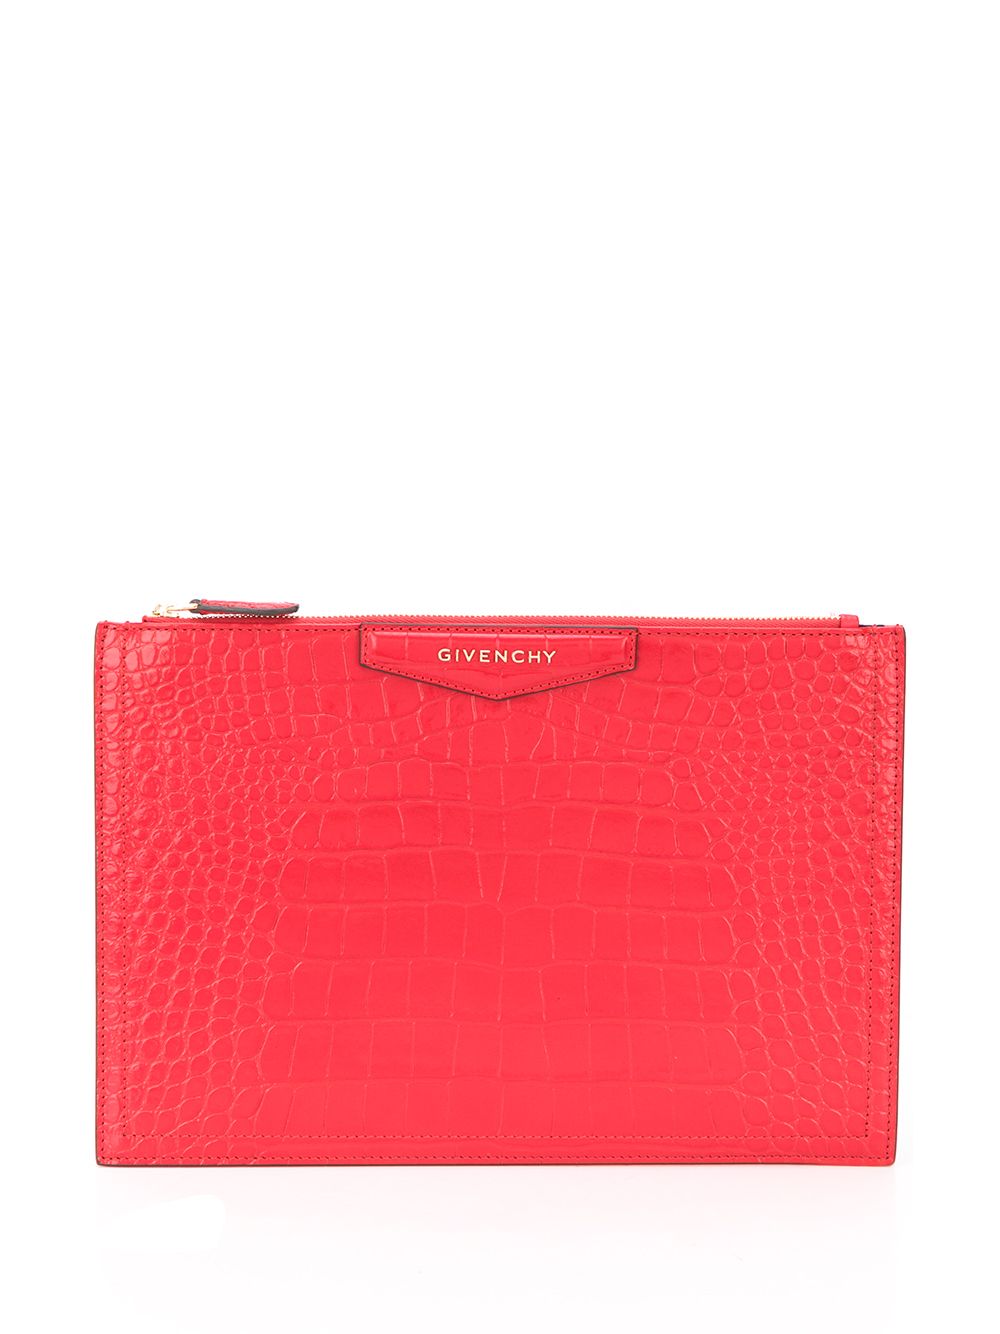 Givenchy Embossed Crocodile Effect Clutch Bag In Red